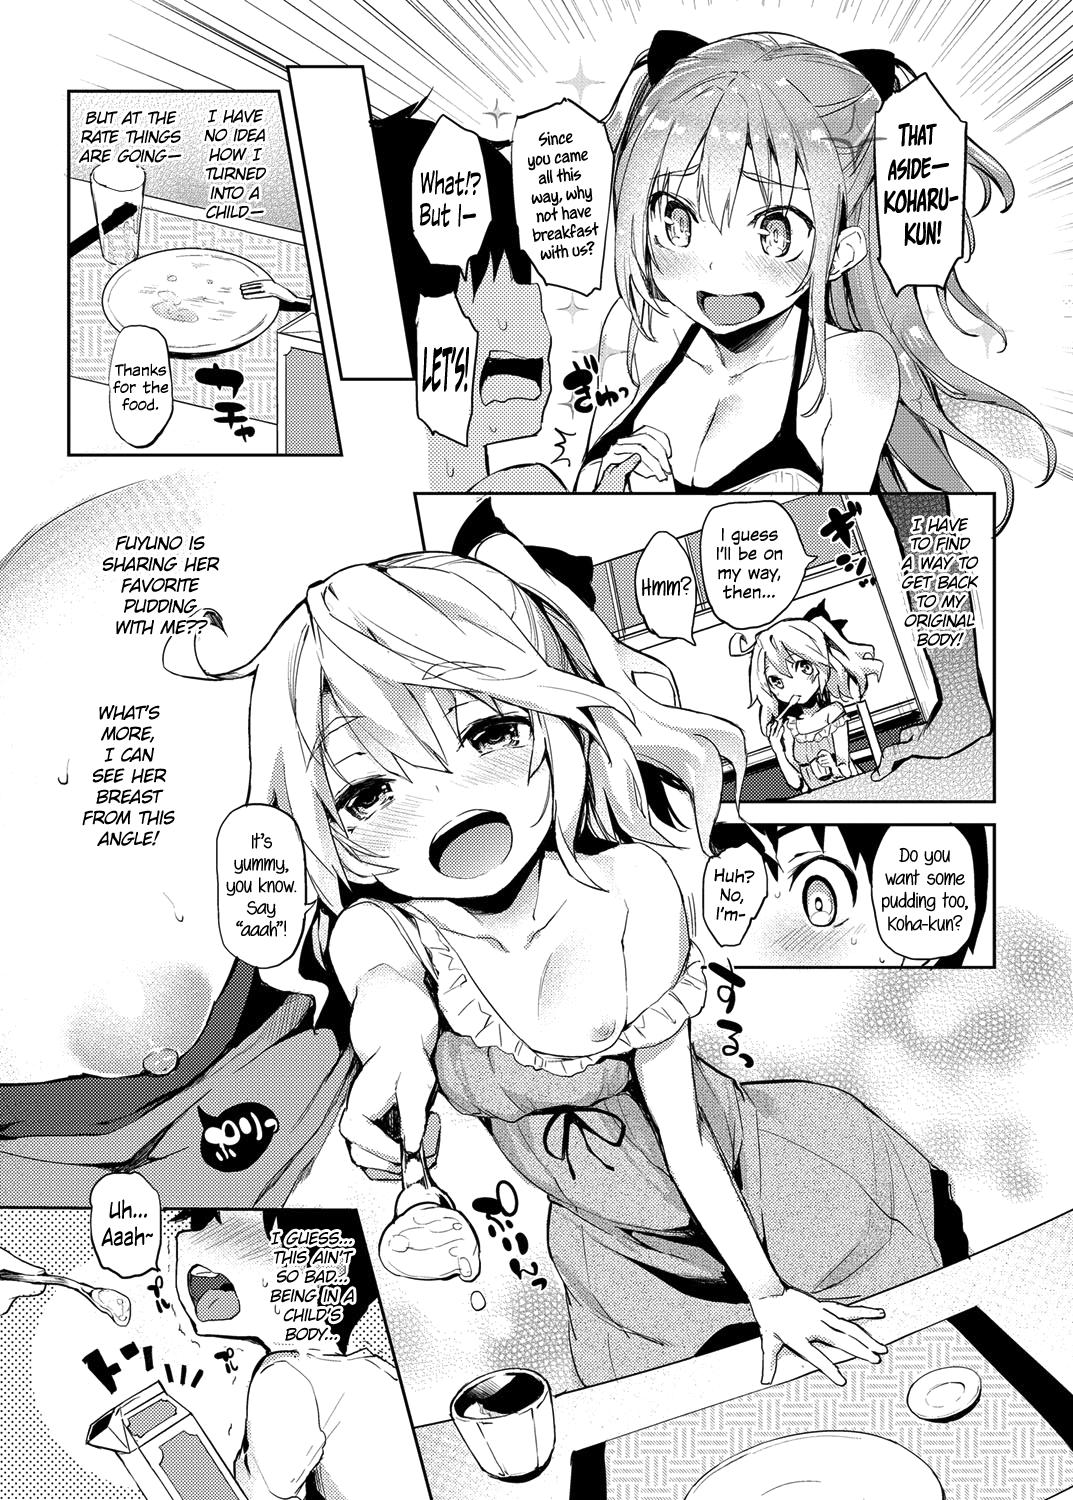 Pack Ane Taiken Shuukan | The Older Sister Experience for a Week Ngentot - Page 7